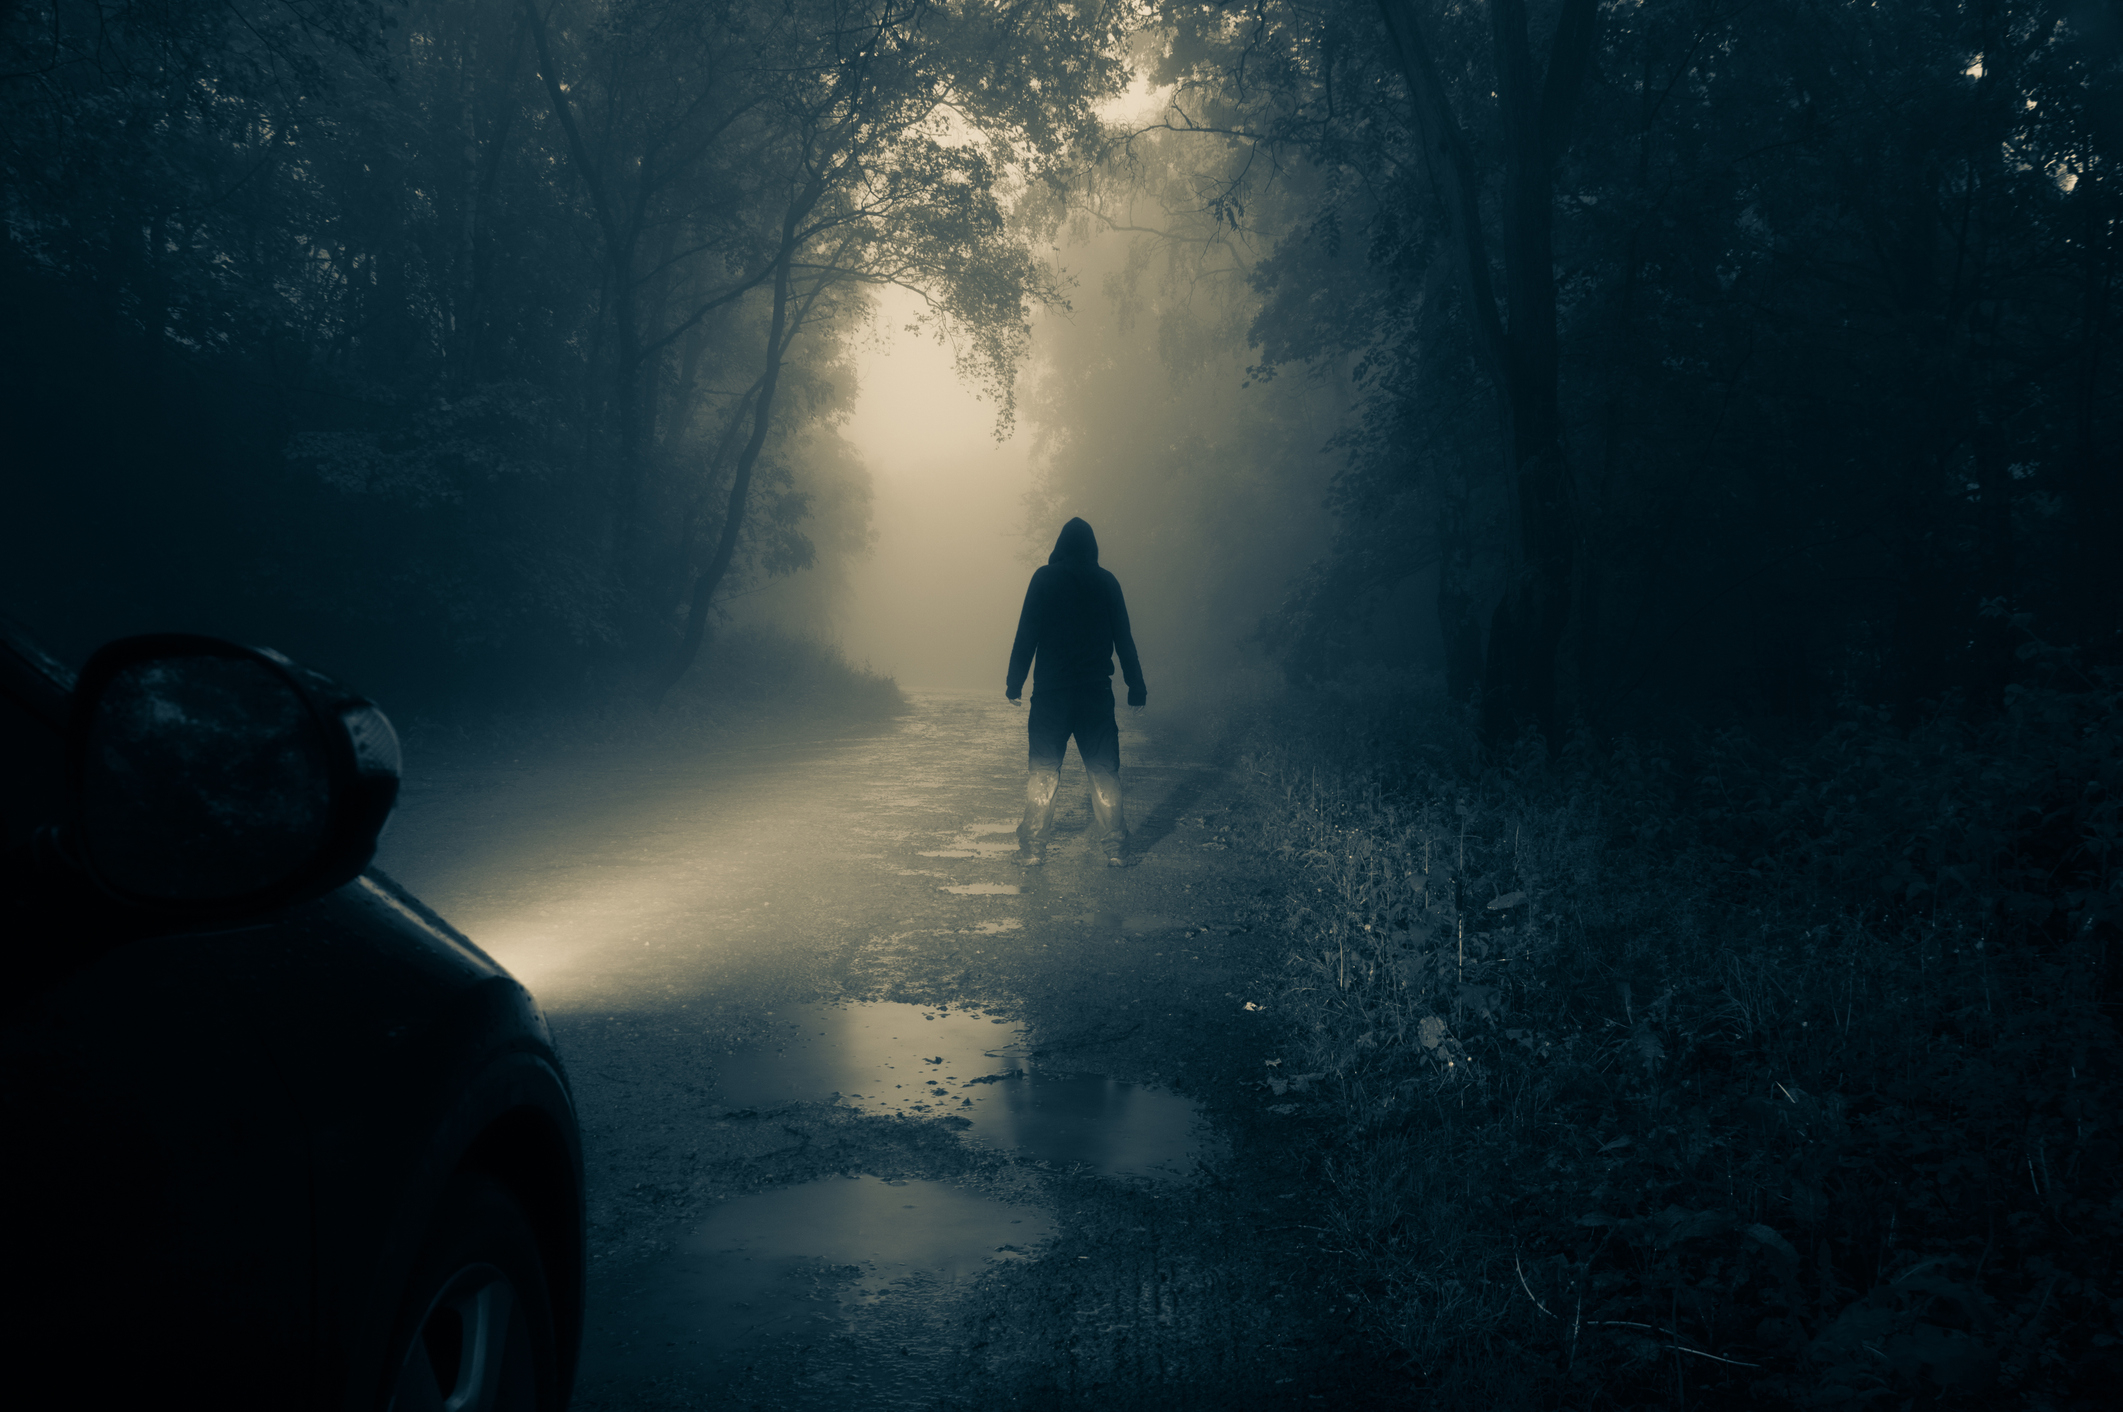 A dark figure on the road in the middle of the woods